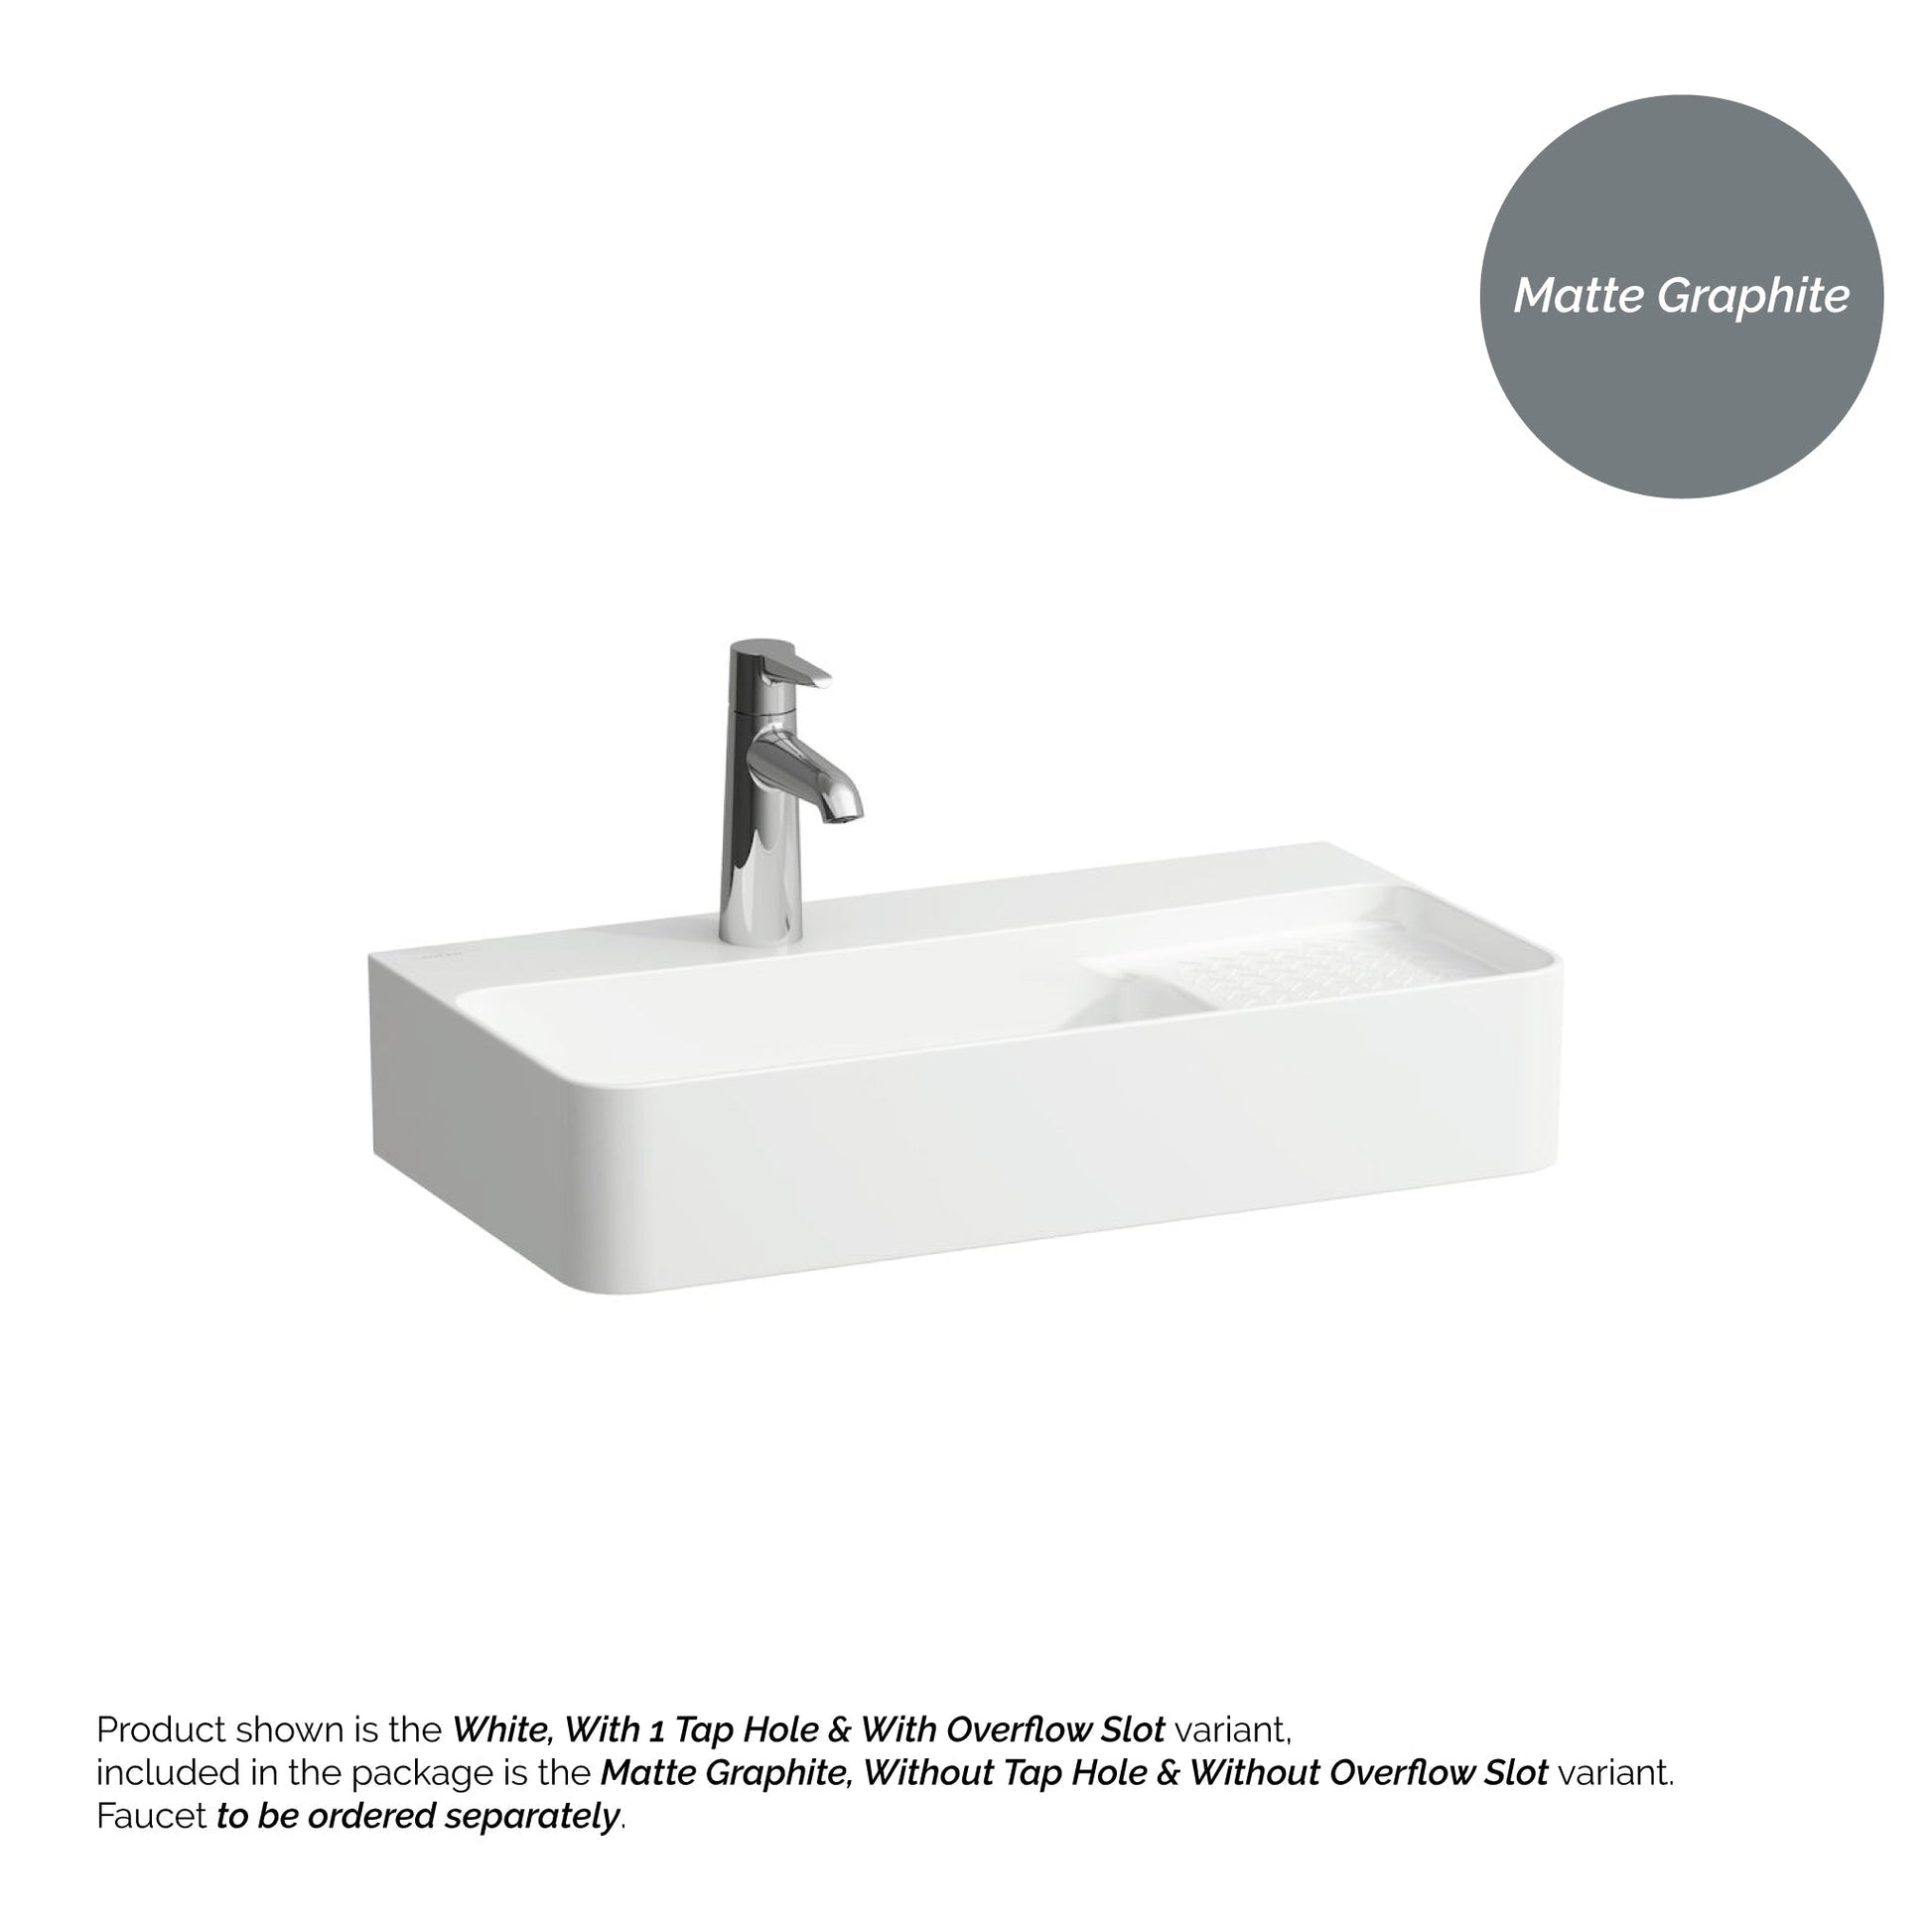 Laufen Val 24" x 12" Rectangular Matte Graphite Wall-Mounted Bathroom Sink Without Facuet Holes and Overflow Slot